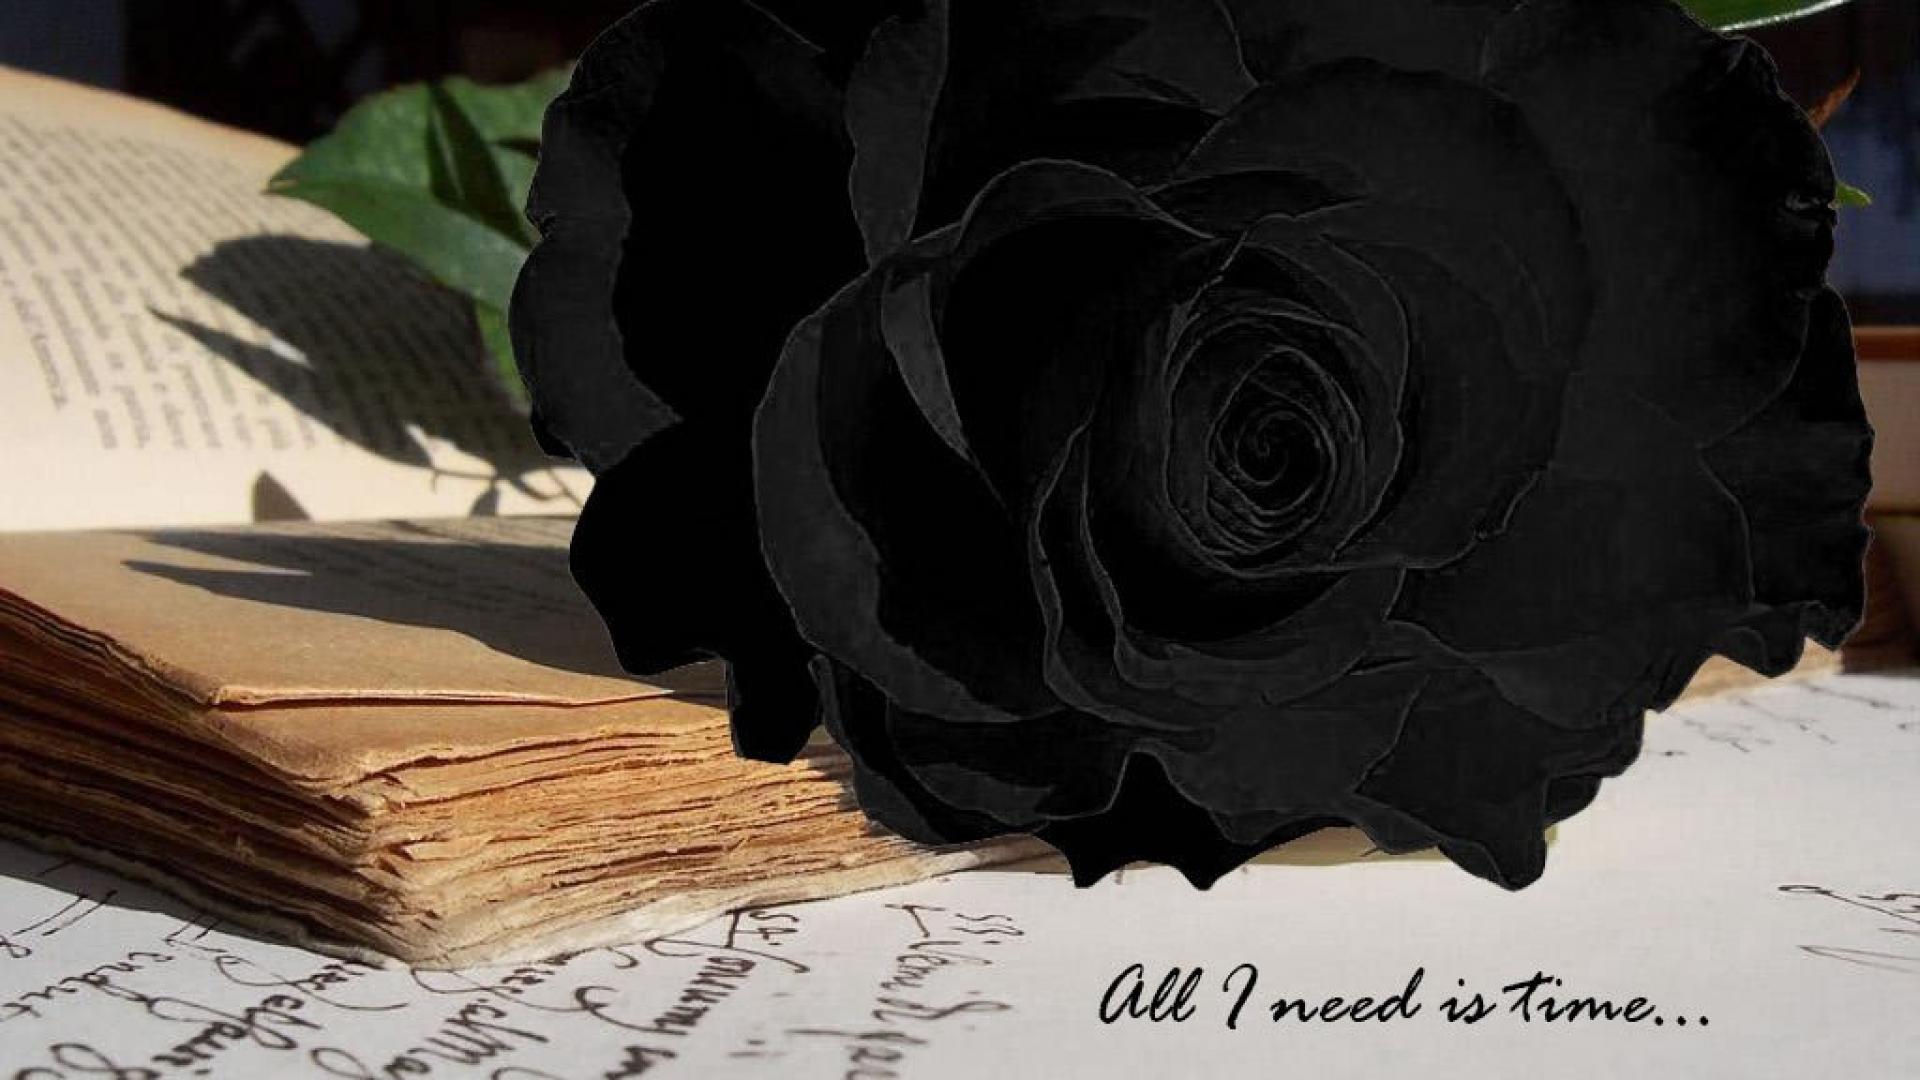 Black Roses - Wallpaper, High Definition, High Quality, Widescreen